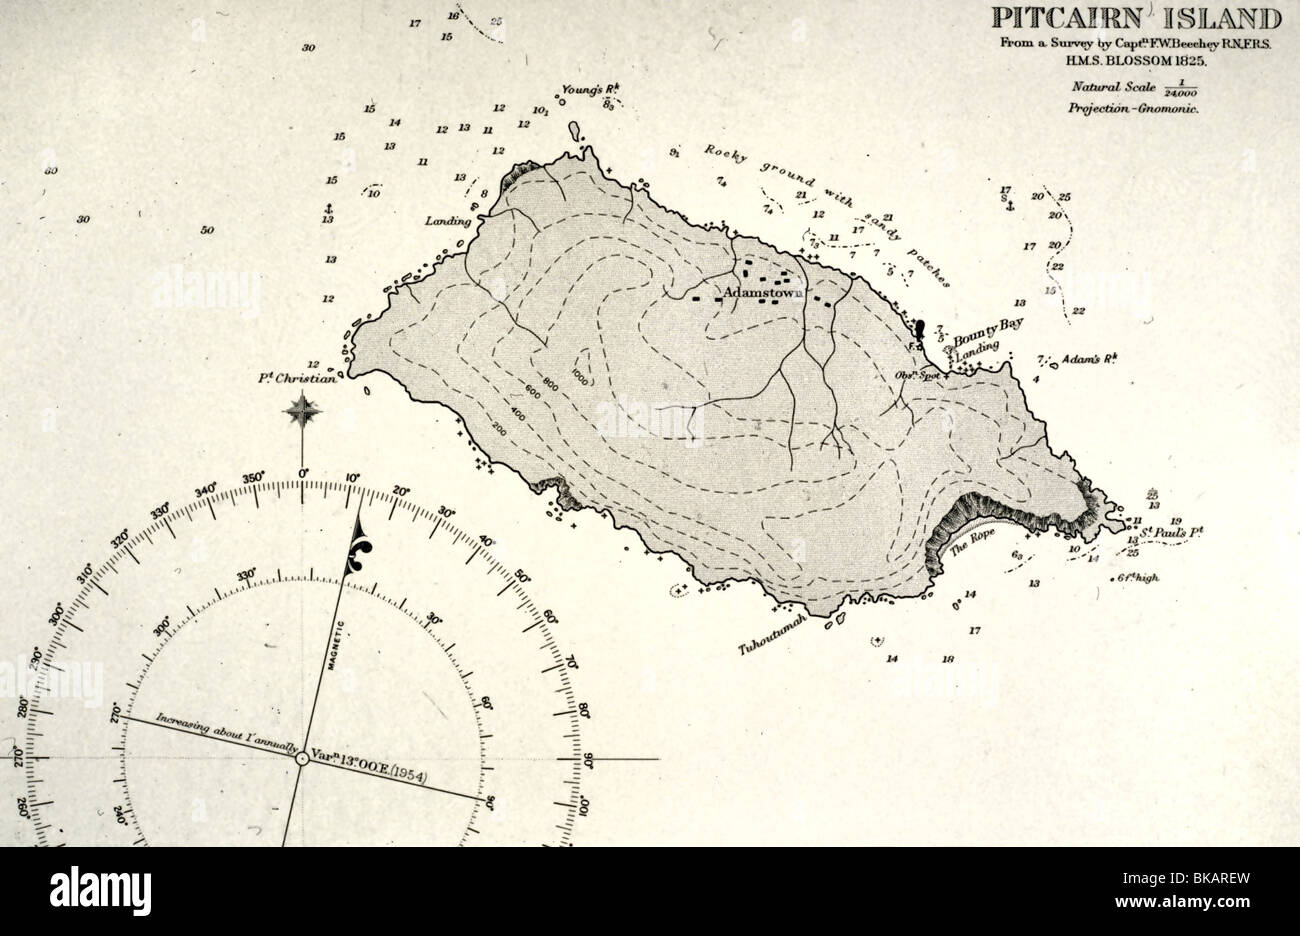 transport / transportation, navigation, Mutiny on the Bounty 1789, Pitcairn Island, the last hideaway of the mutineers, official sea chart, based in survey by F.W. Beechey, 1825, map, Pacific, British colony since 1835, Adamstown, Polynesia, historic, historical, 18th century, Stock Photo